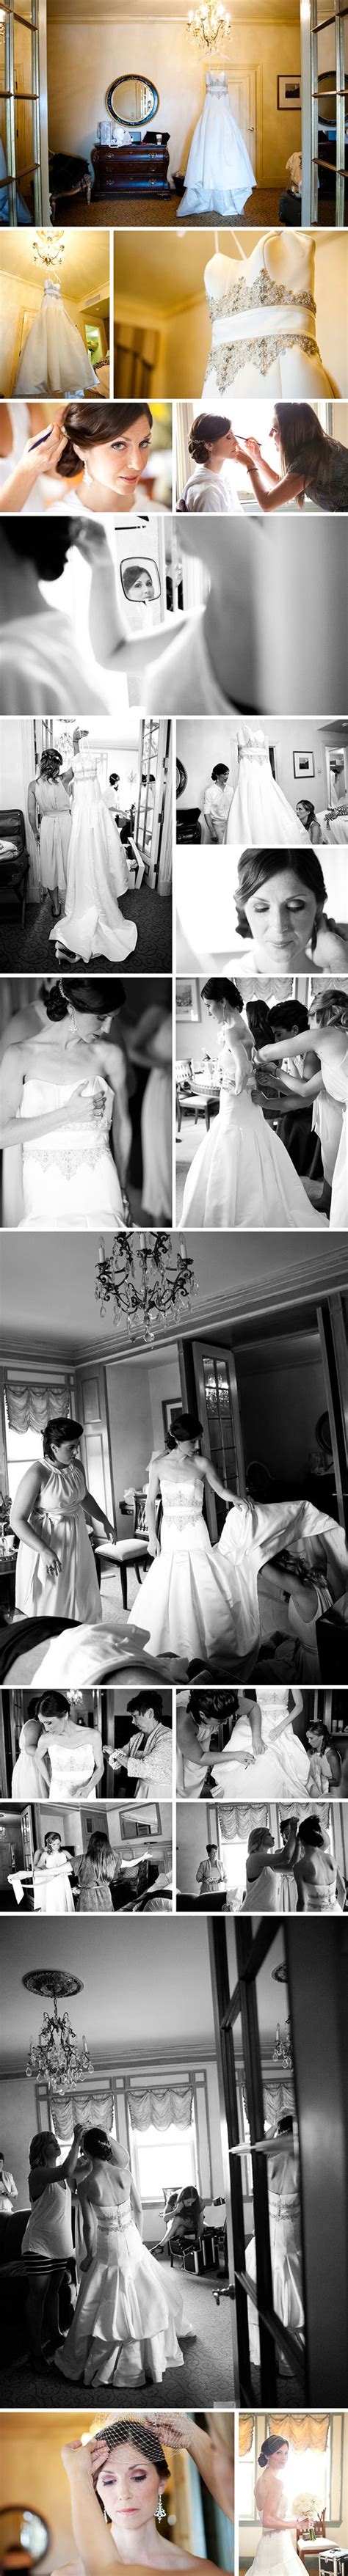 Receptions Wedding And Awesome On Pinterest